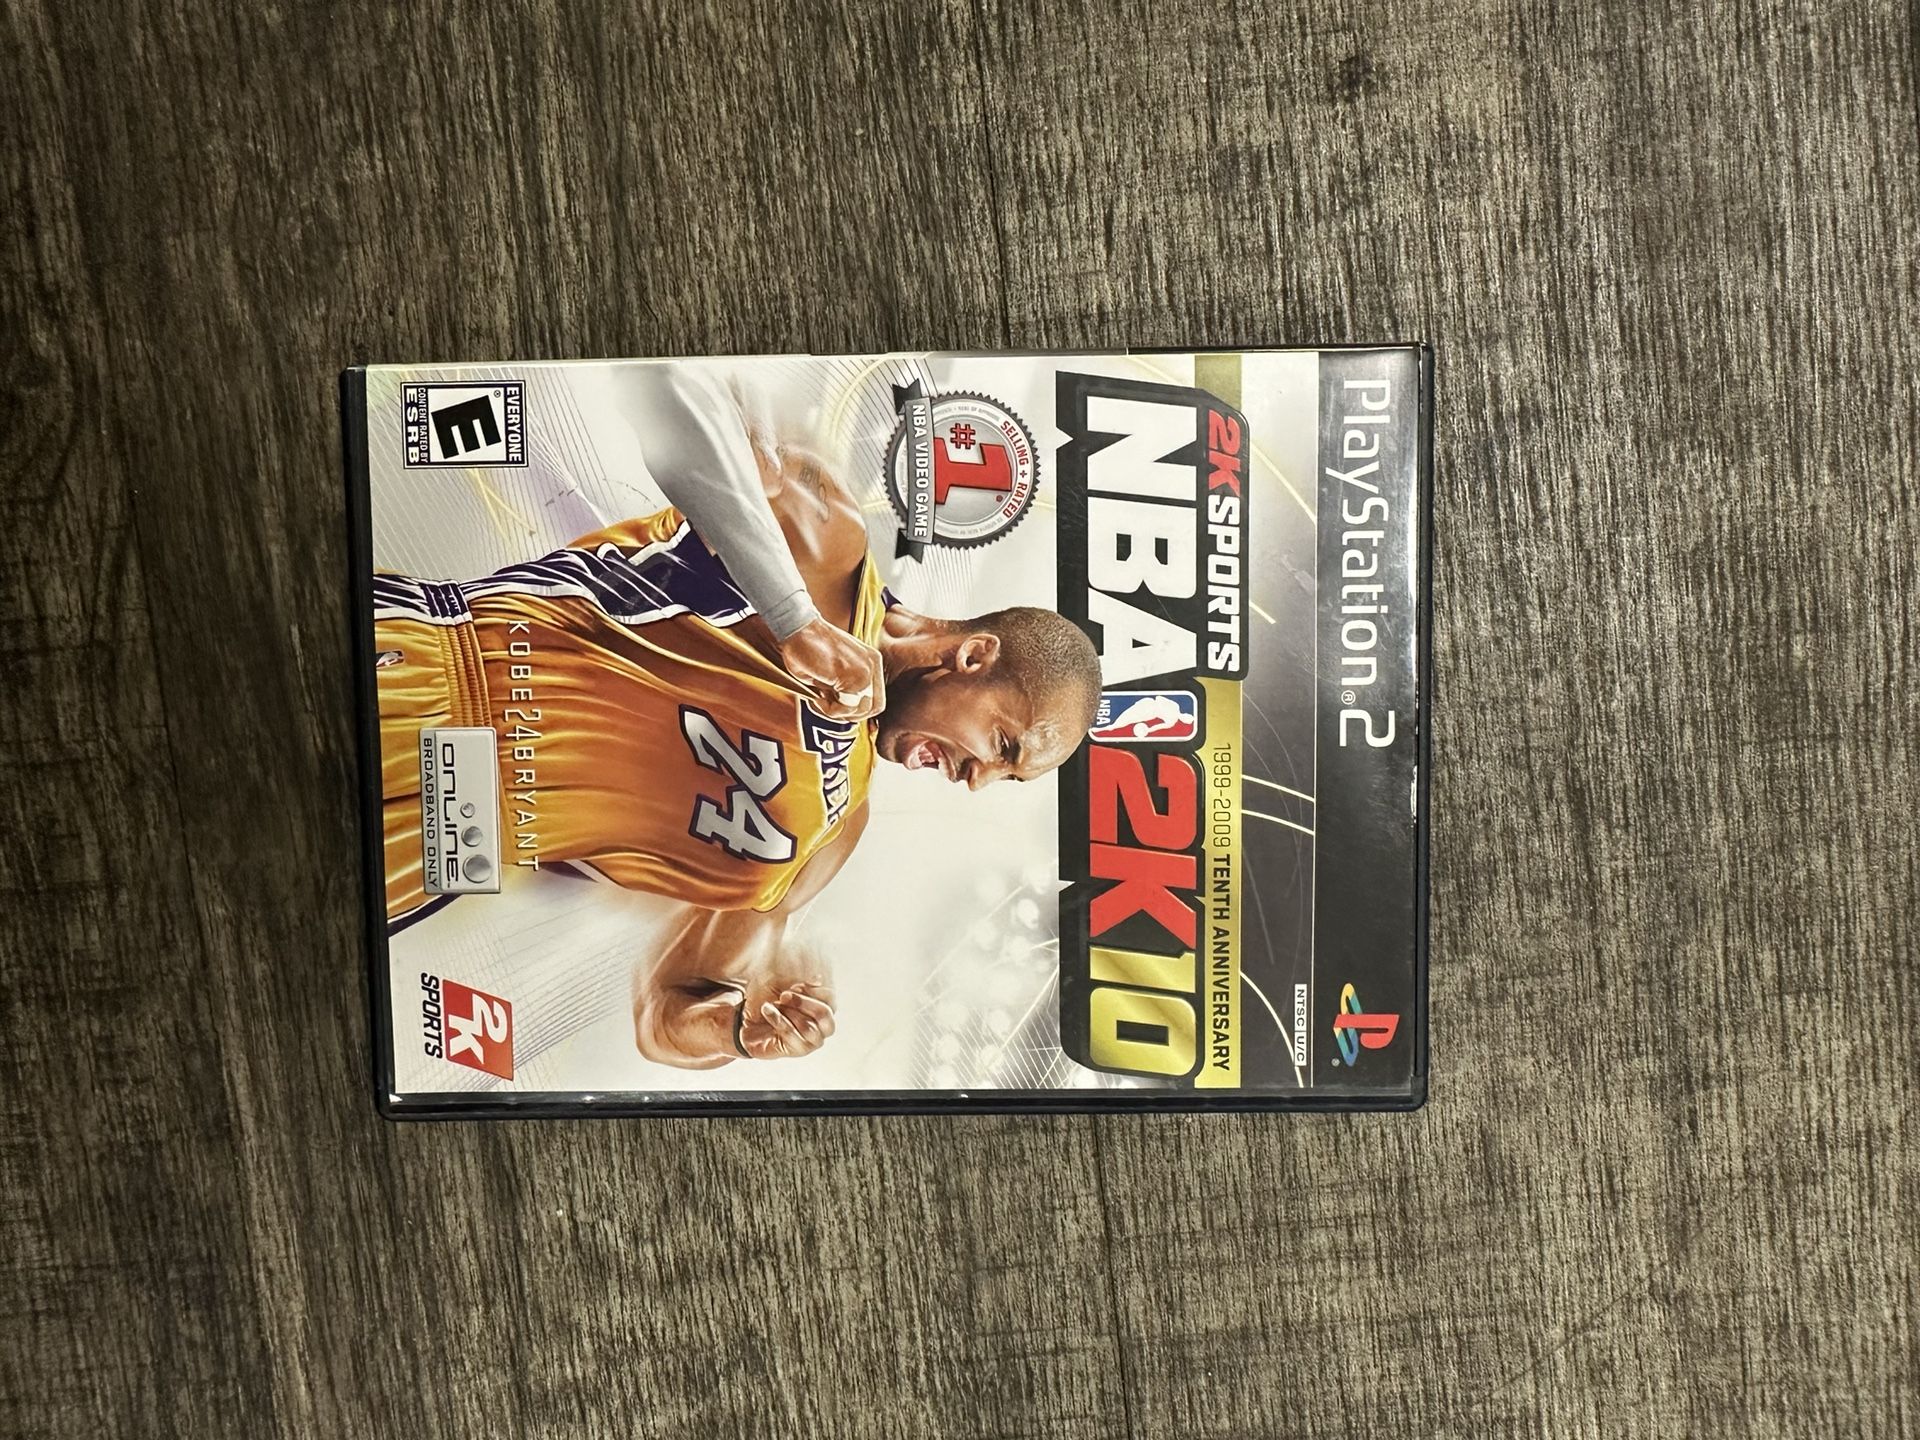 NBA 2K10 PS2 Sony PlayStation 2 Kobe Bryant 1(contact info removed) Tenth Anniversary Edition